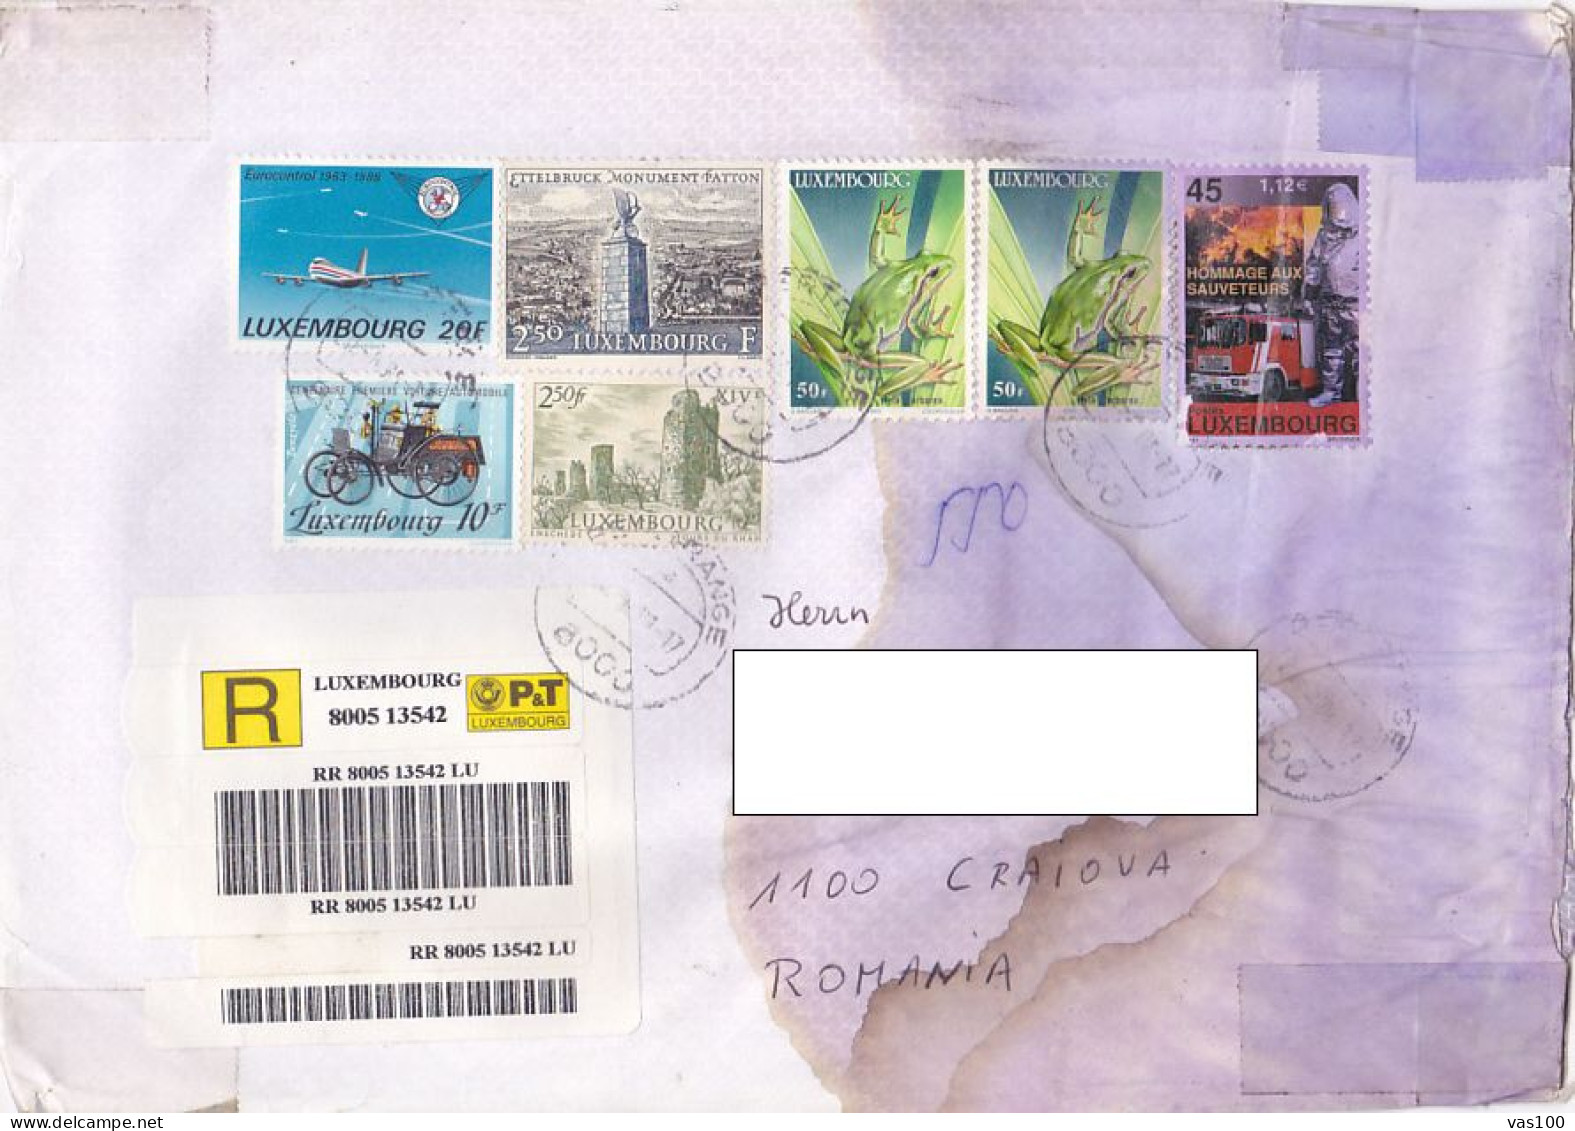 PLANE, FIRST CAR, MONUMENT, TOWER, FROG, FIREFIGHTERS, STAMPS ON REGISTERED COVER, 2001, LUXEMBOURG - Lettres & Documents